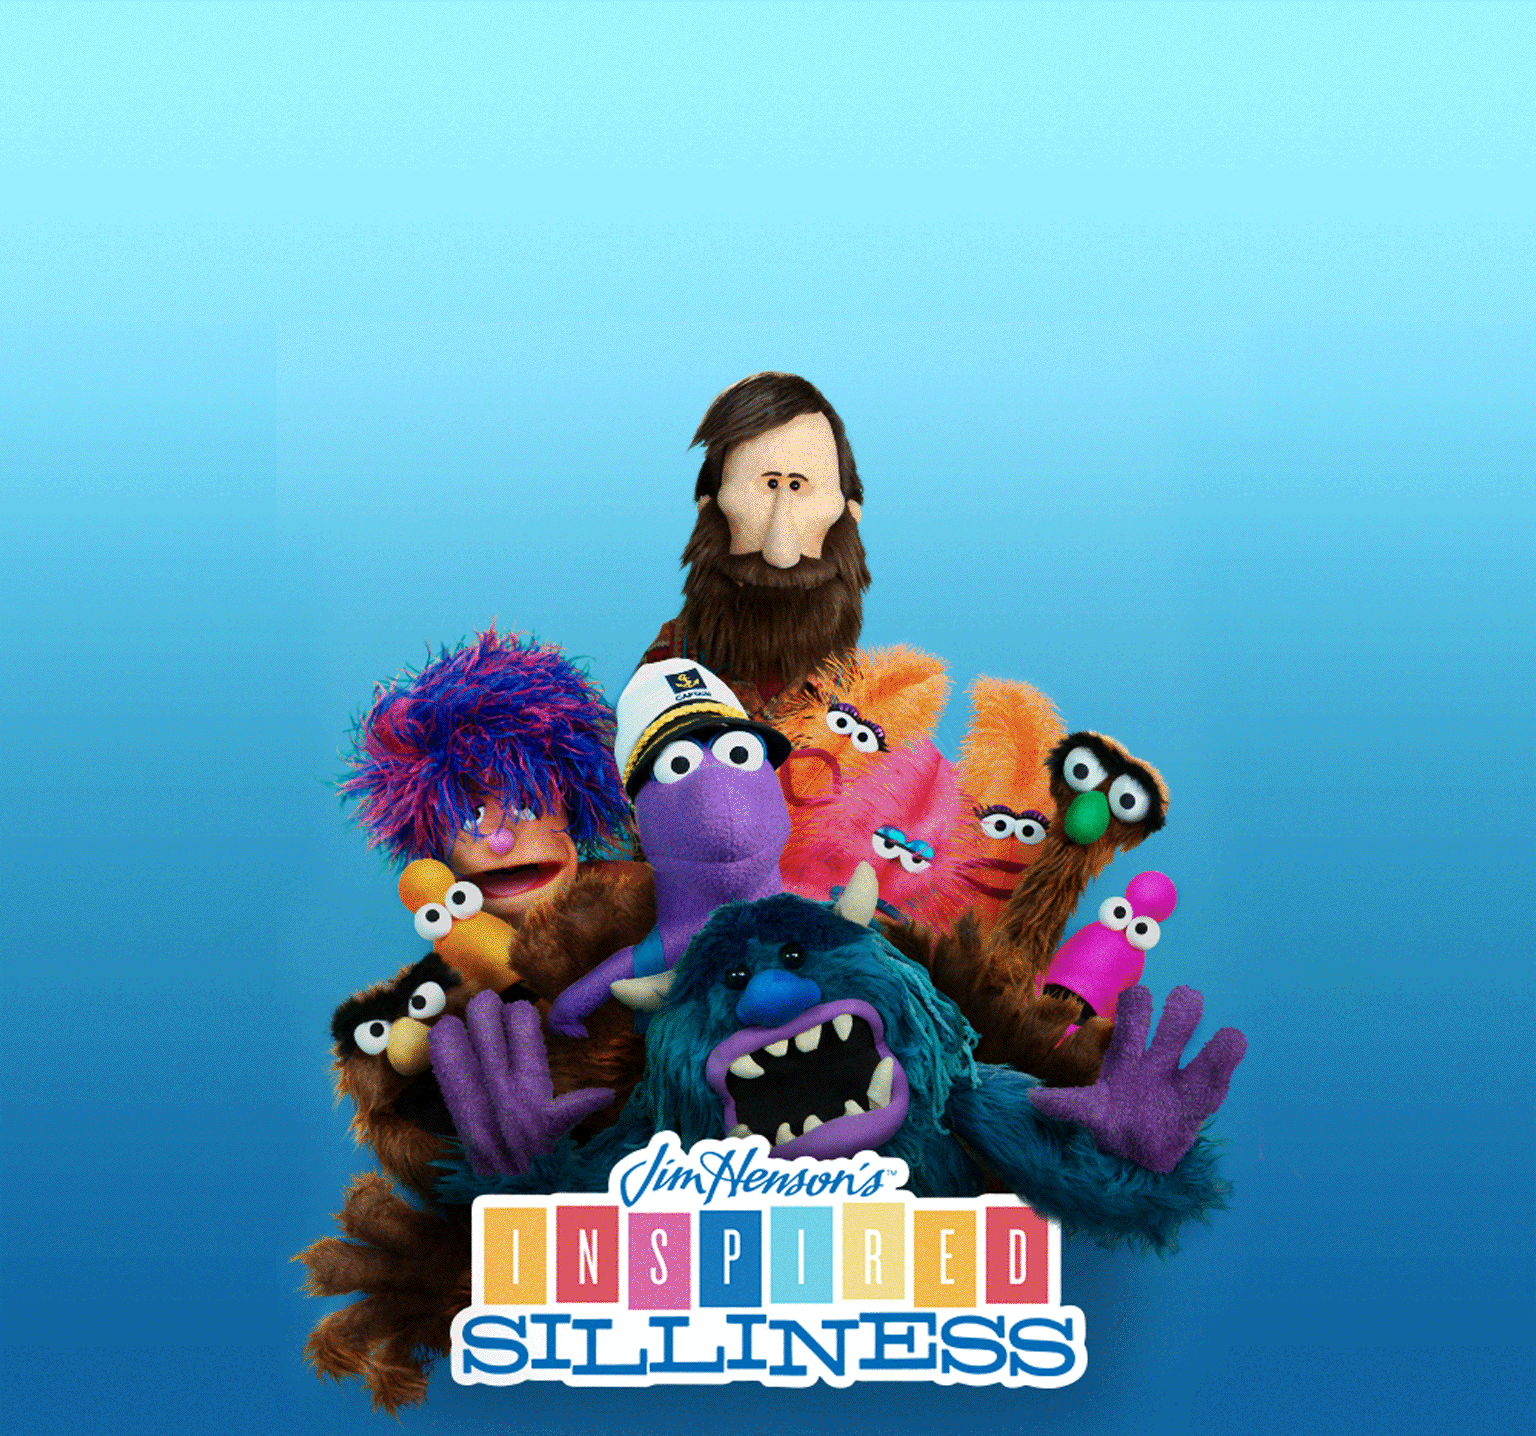 Introducing Jim Henson’s Inspired Silliness